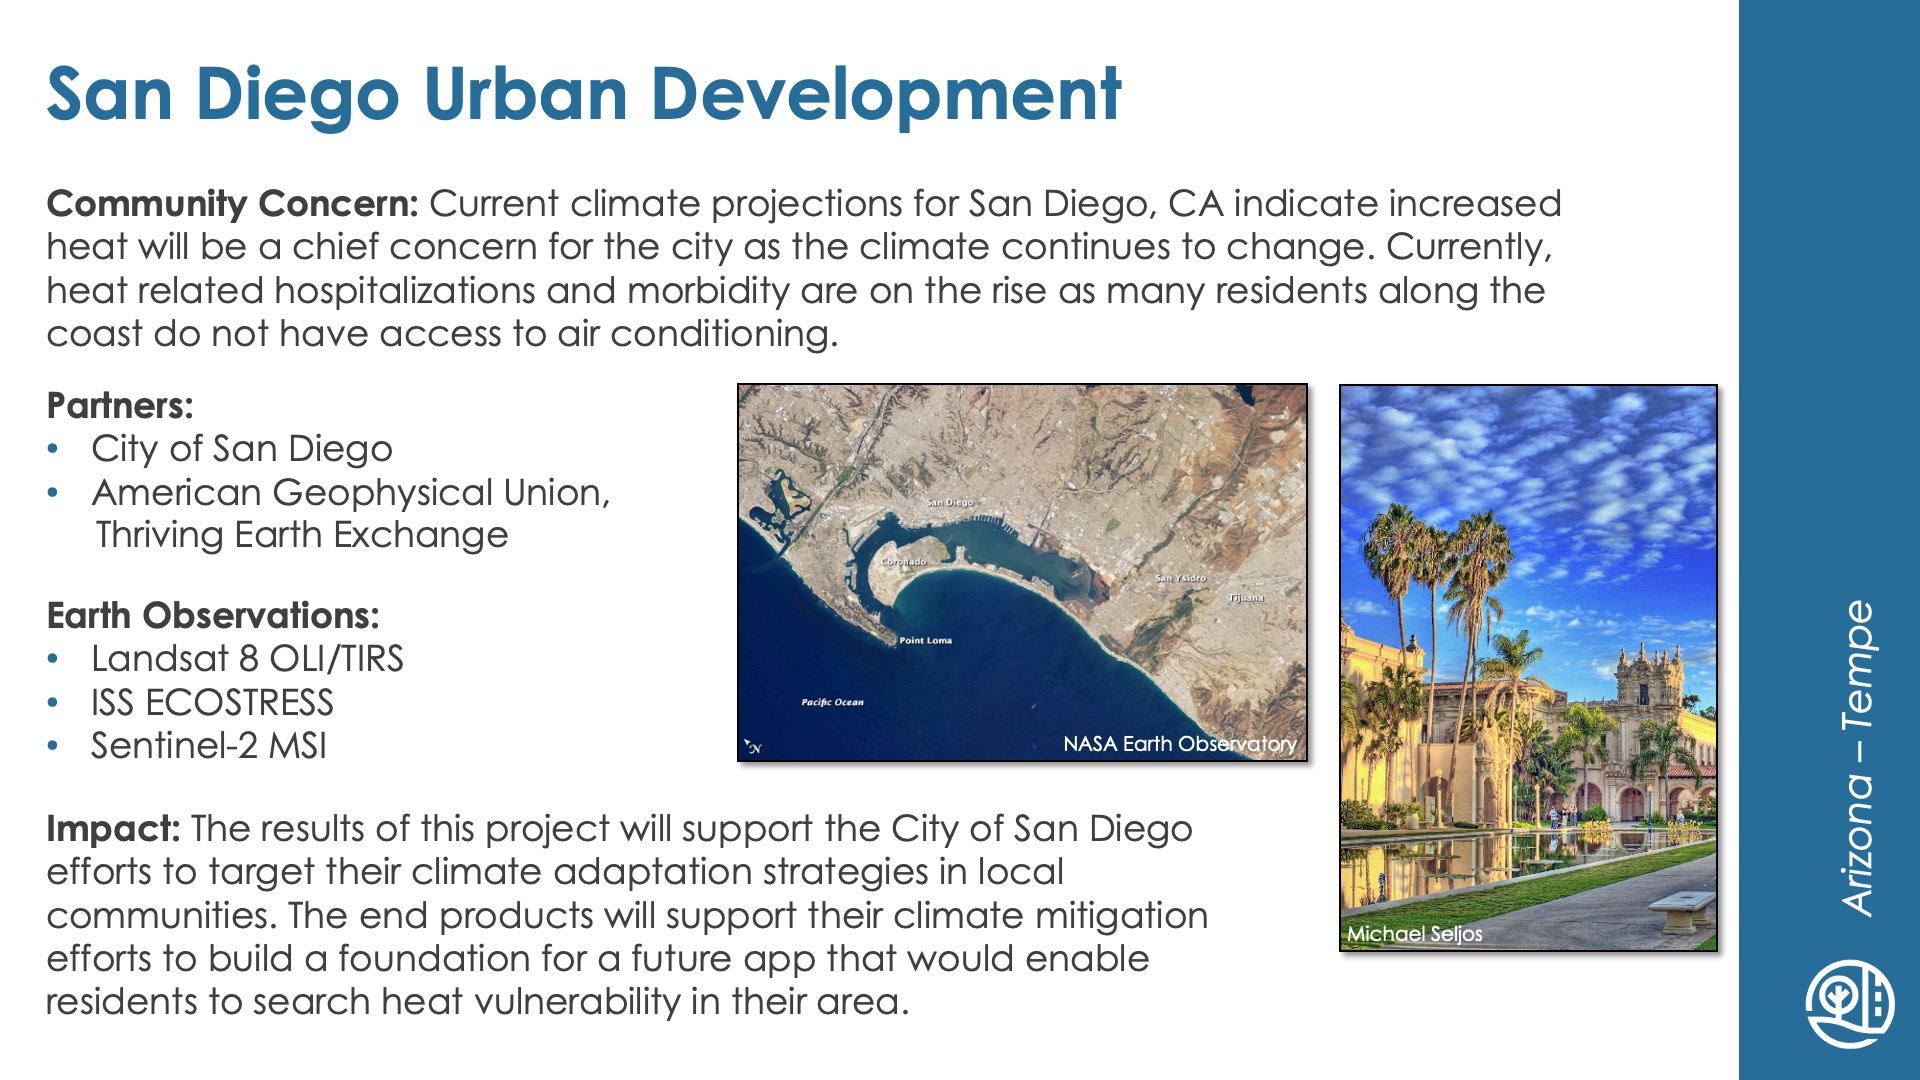 Slide title: San Diego Urban DevelopmentDEVELOP Node: Arizona - TempeCommunity Concern: Current climate projections for San Diego, CA indicate increased heat will be a chief concern for the city as the climate continues to change. Currently, heat related hospitalizations and morbidity are on the rise as many residents along the coast do not have access to air conditioning.Impact: The results of this project will support the City of San Diego efforts to target their climate adaptation strategies in local communities. The end products will support their climate mitigation efforts to build a foundation for a future app that would enable residents to search heat vulnerability in their area.Partners: City of San Diego, American Geophysical Union, Thriving Earth ExchangeEarth Observations: Landsat 8 OLI/TIRS, ISS ECOSTRESS, Sentinel-2 MSI